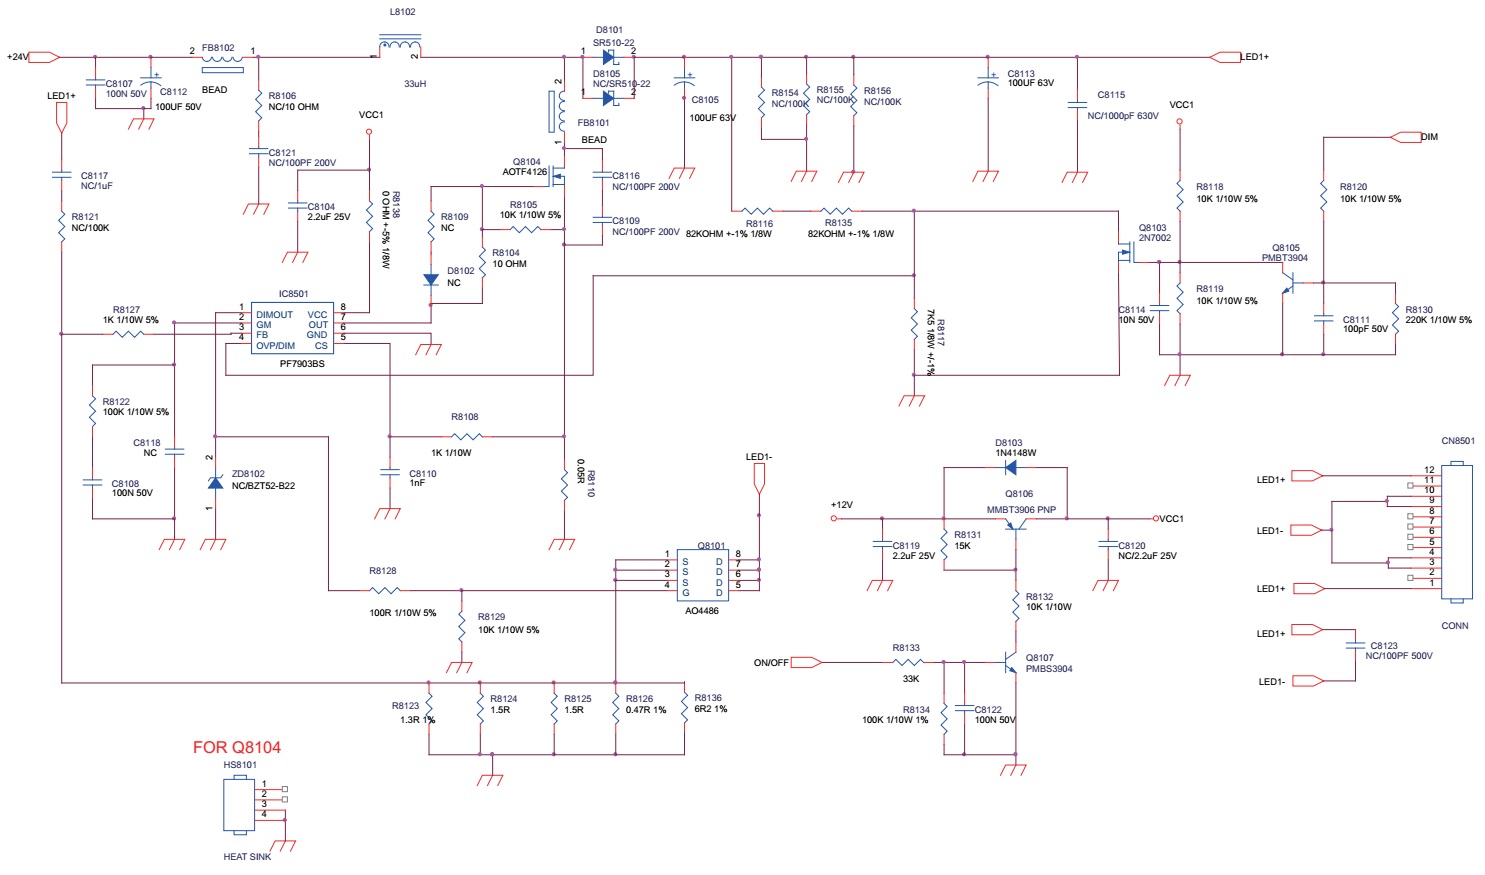 Electro help: Philips 715G6163 SMPS schematic (Circuit diagram)